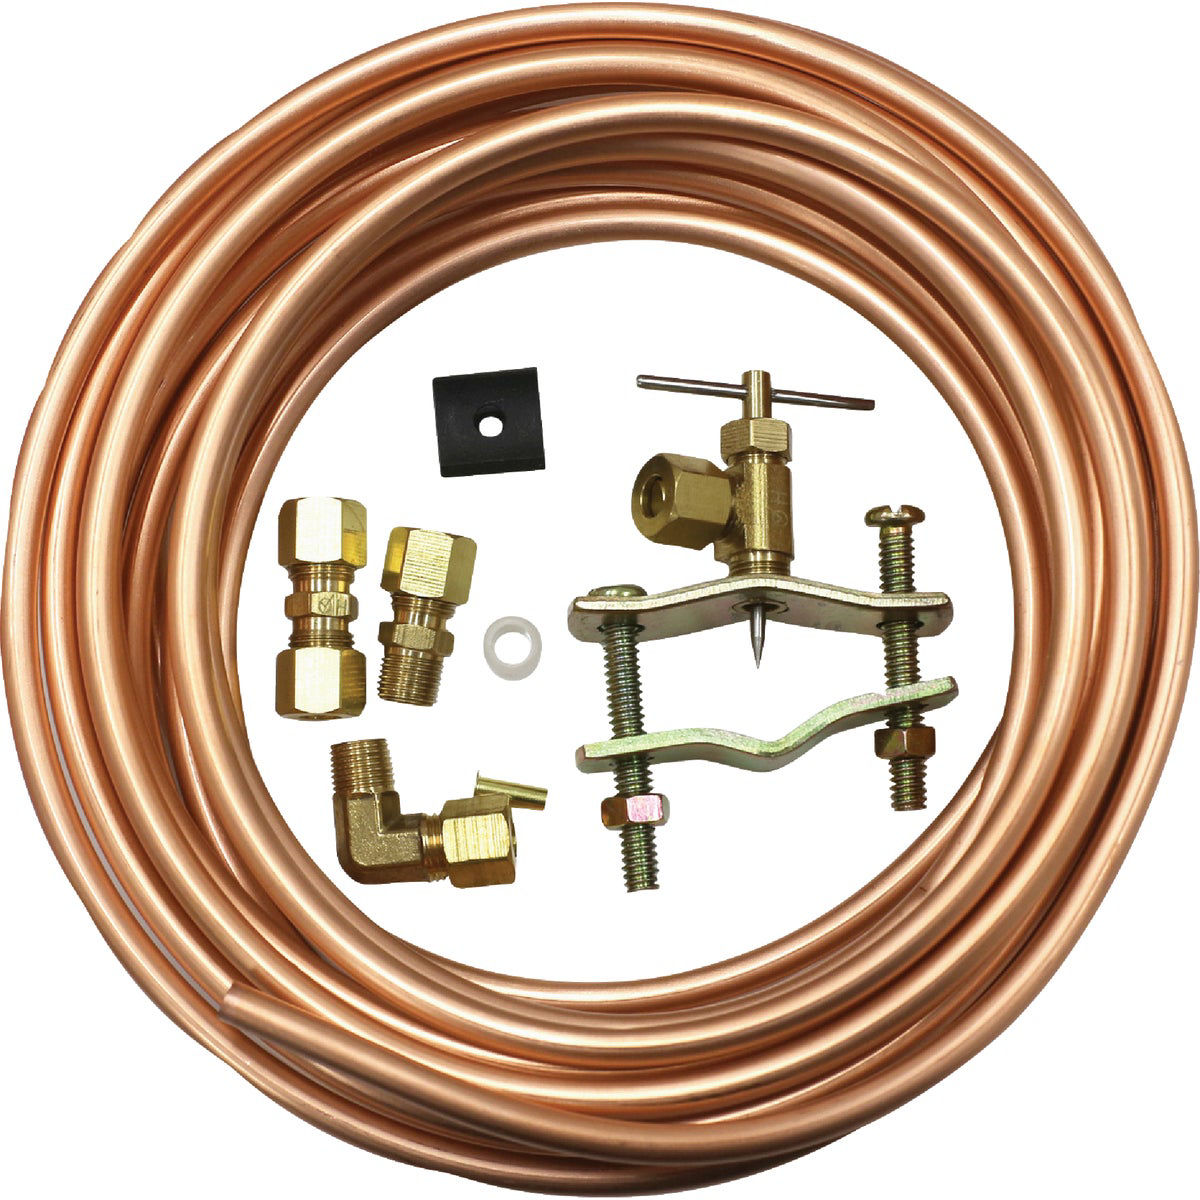 20 ft. Copper Ice Maker Kit with Self Tapping Saddle Valve